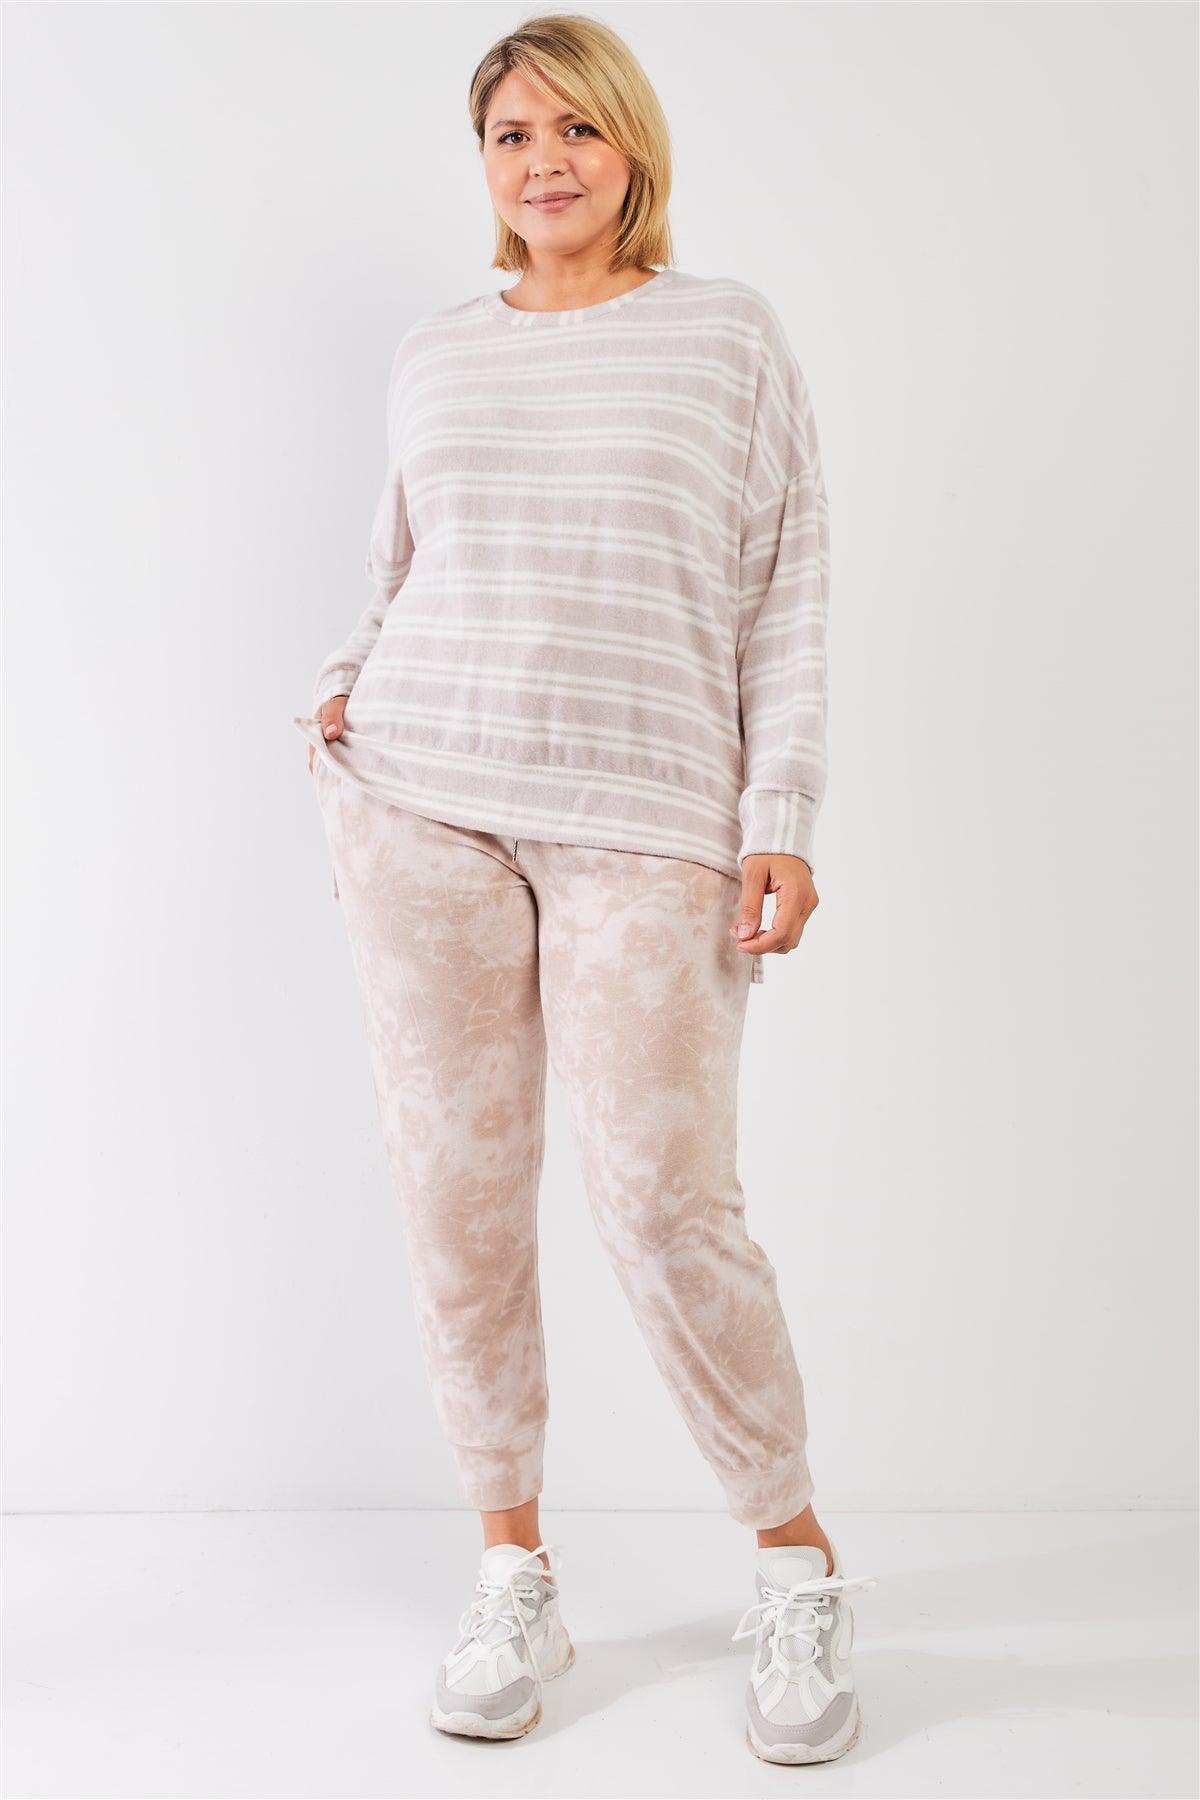 Junior Plus Taupe & Ivory Striped Polyester Fleece Round Neck Dropped Shoulder Long Sleeves Uneven Relaxed Top /3-2-1